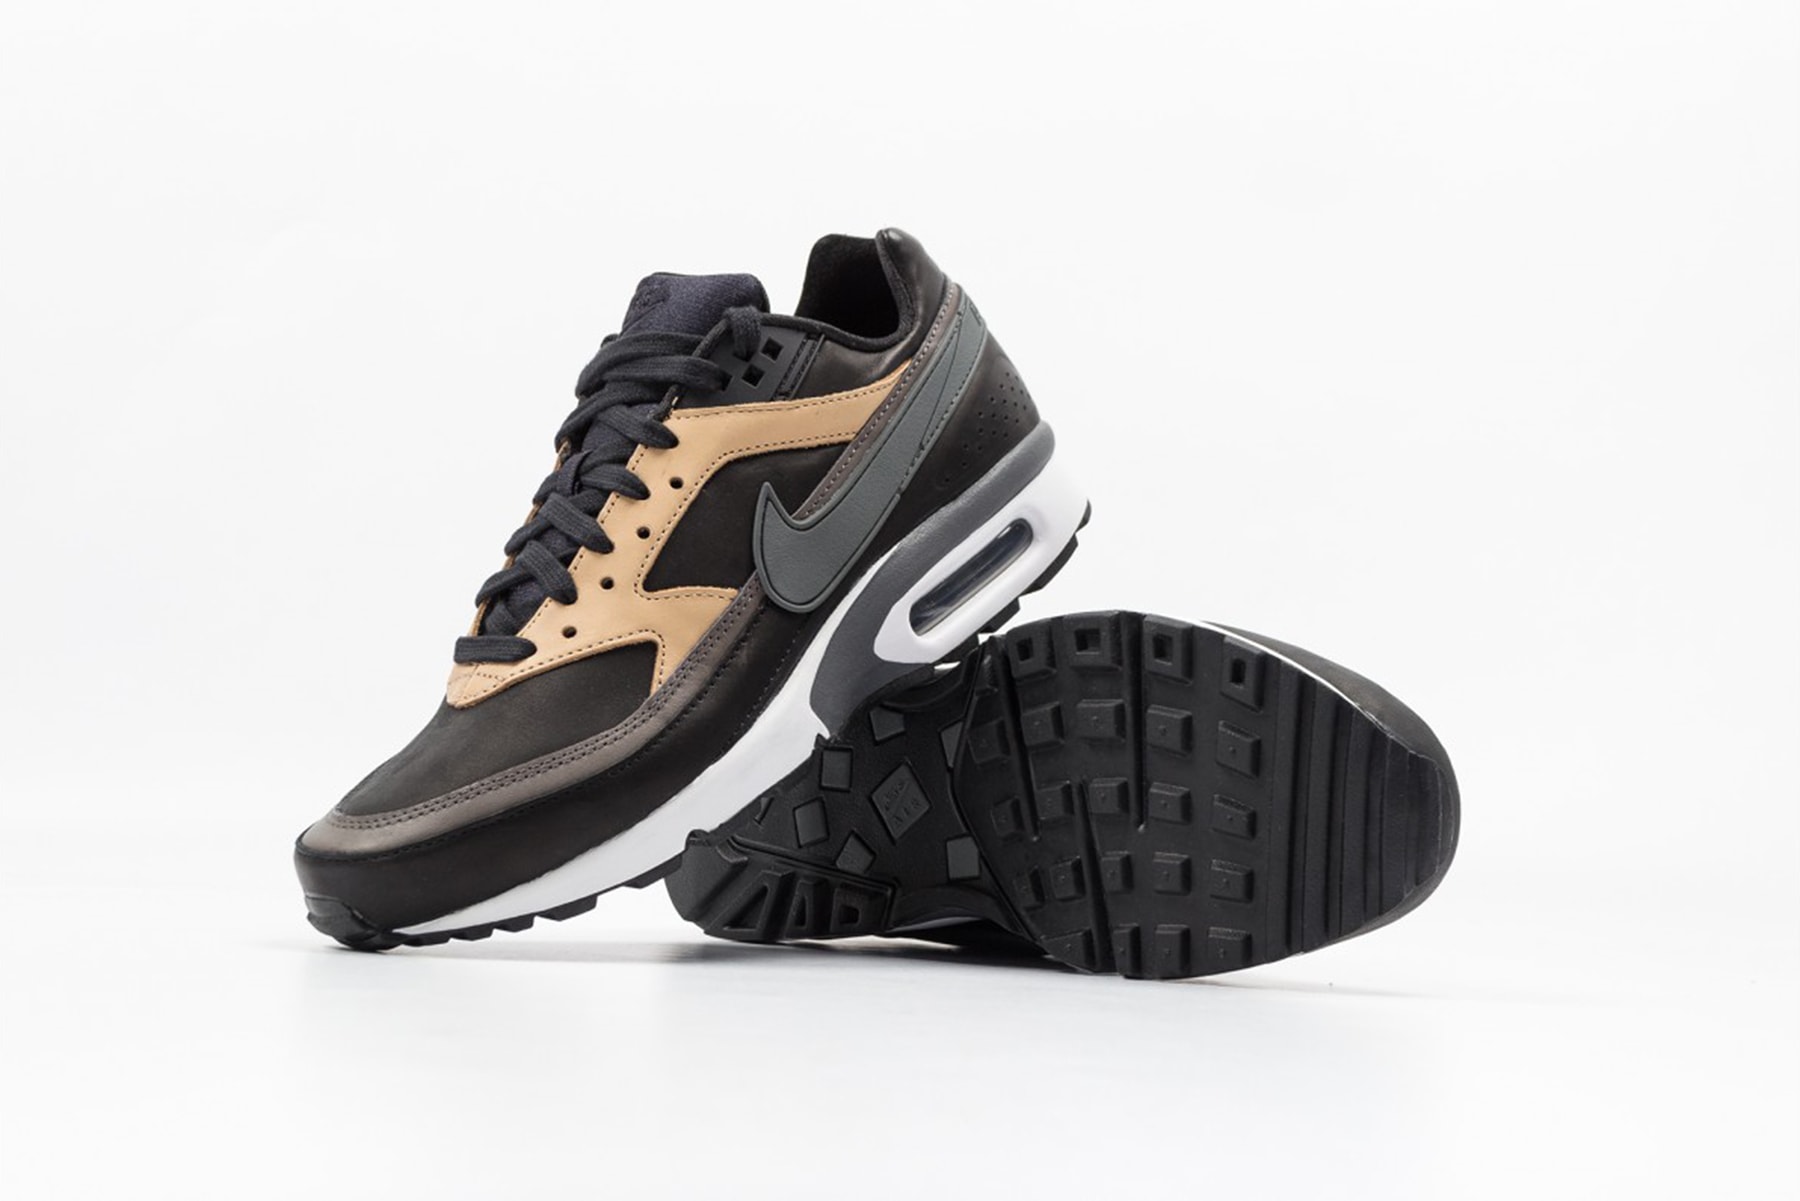 Nike Air Max BW Another "Vachetta Tan" Makeover